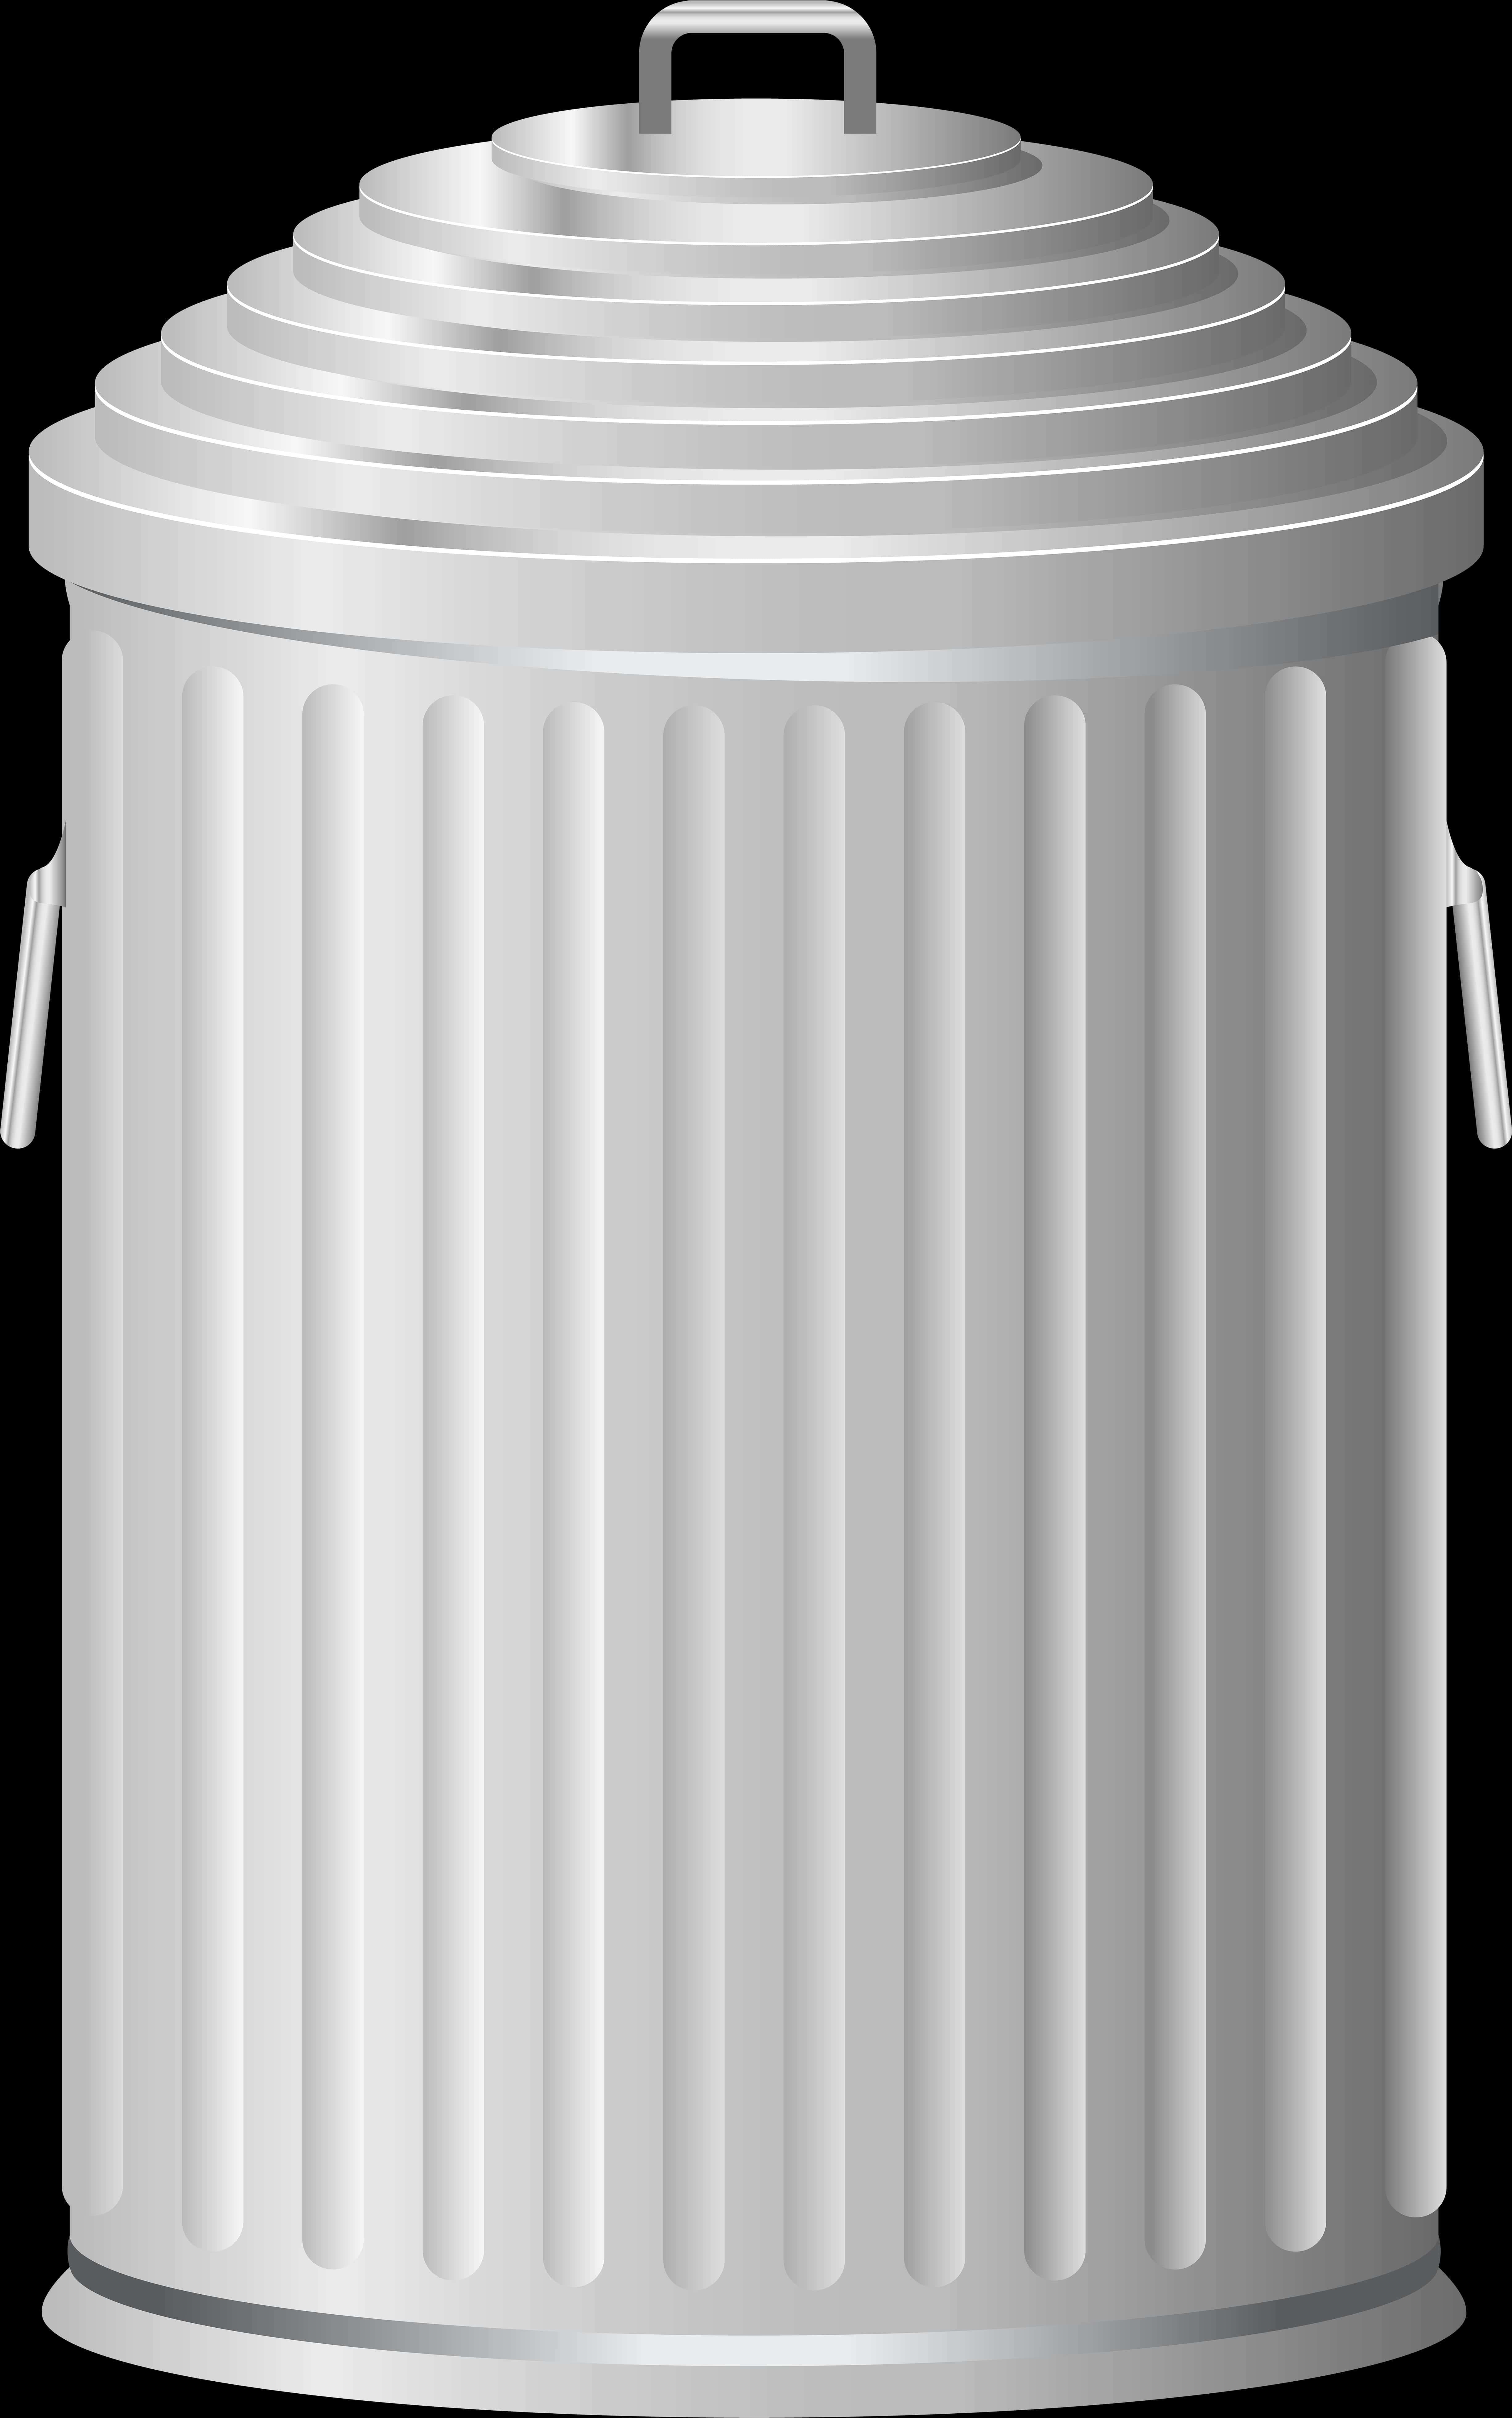 A White Trash Can With A Lid